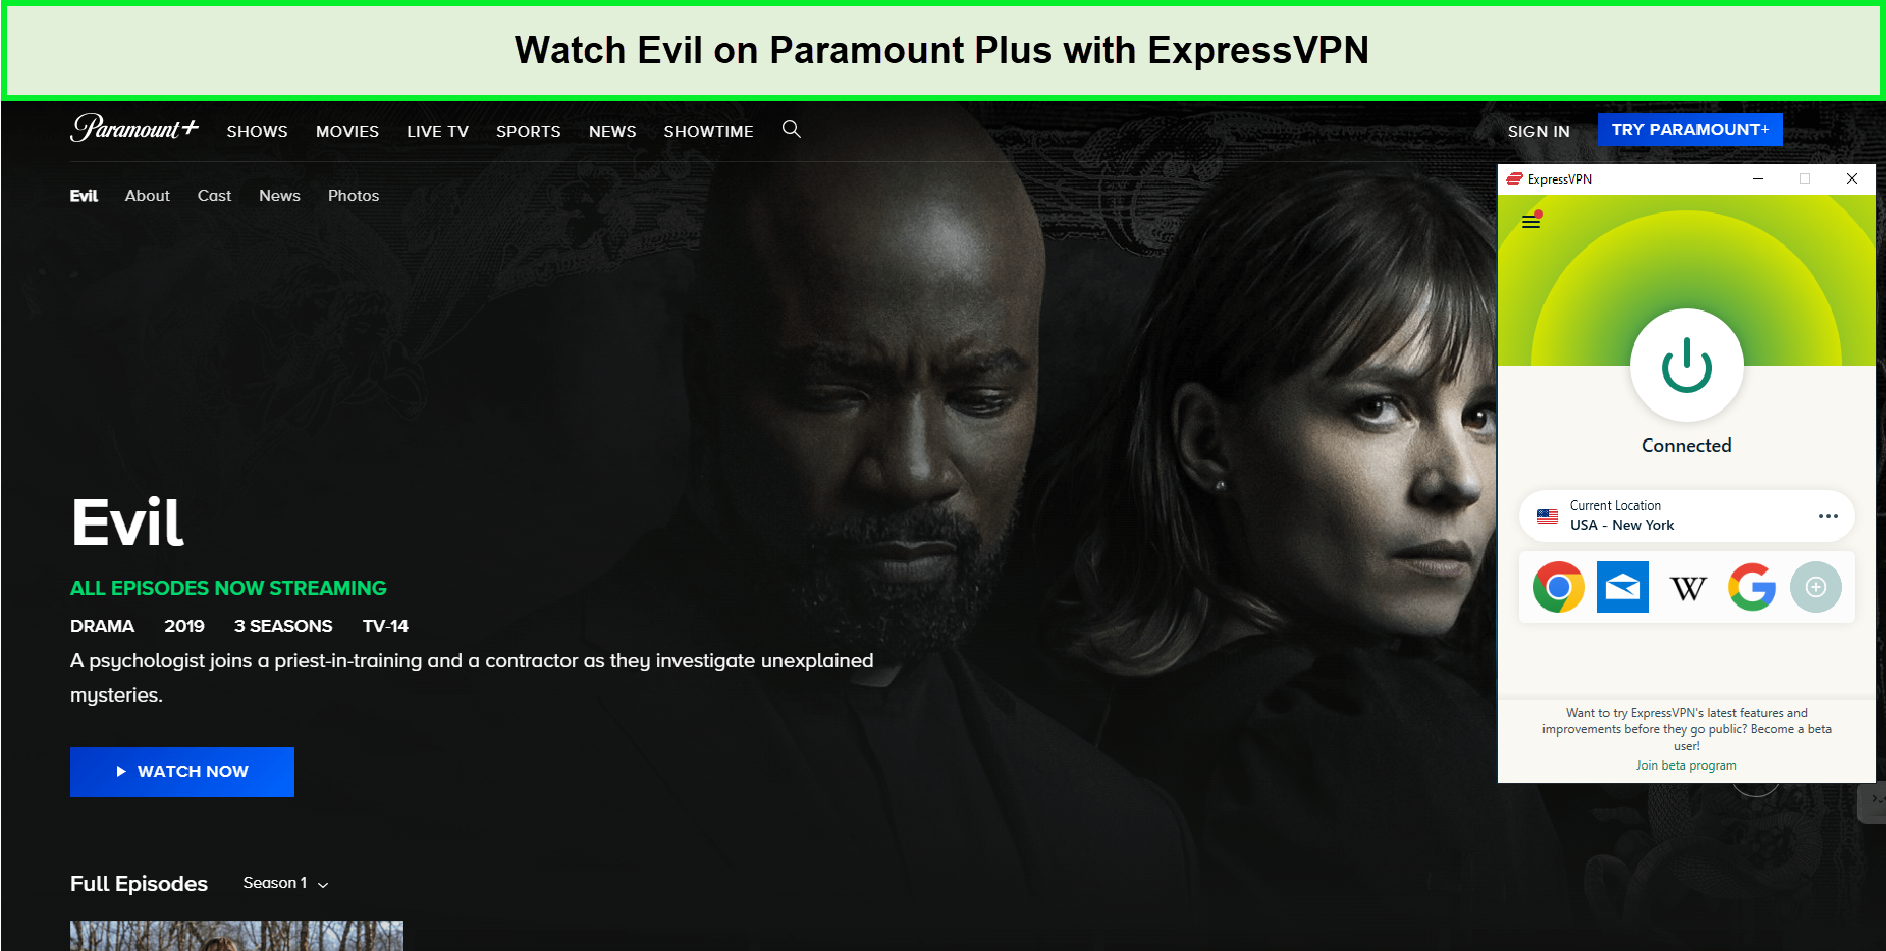 Watch-Evil-All-Seasons-outside-USA-on-Paramount-Plus-with-ExpressVPN